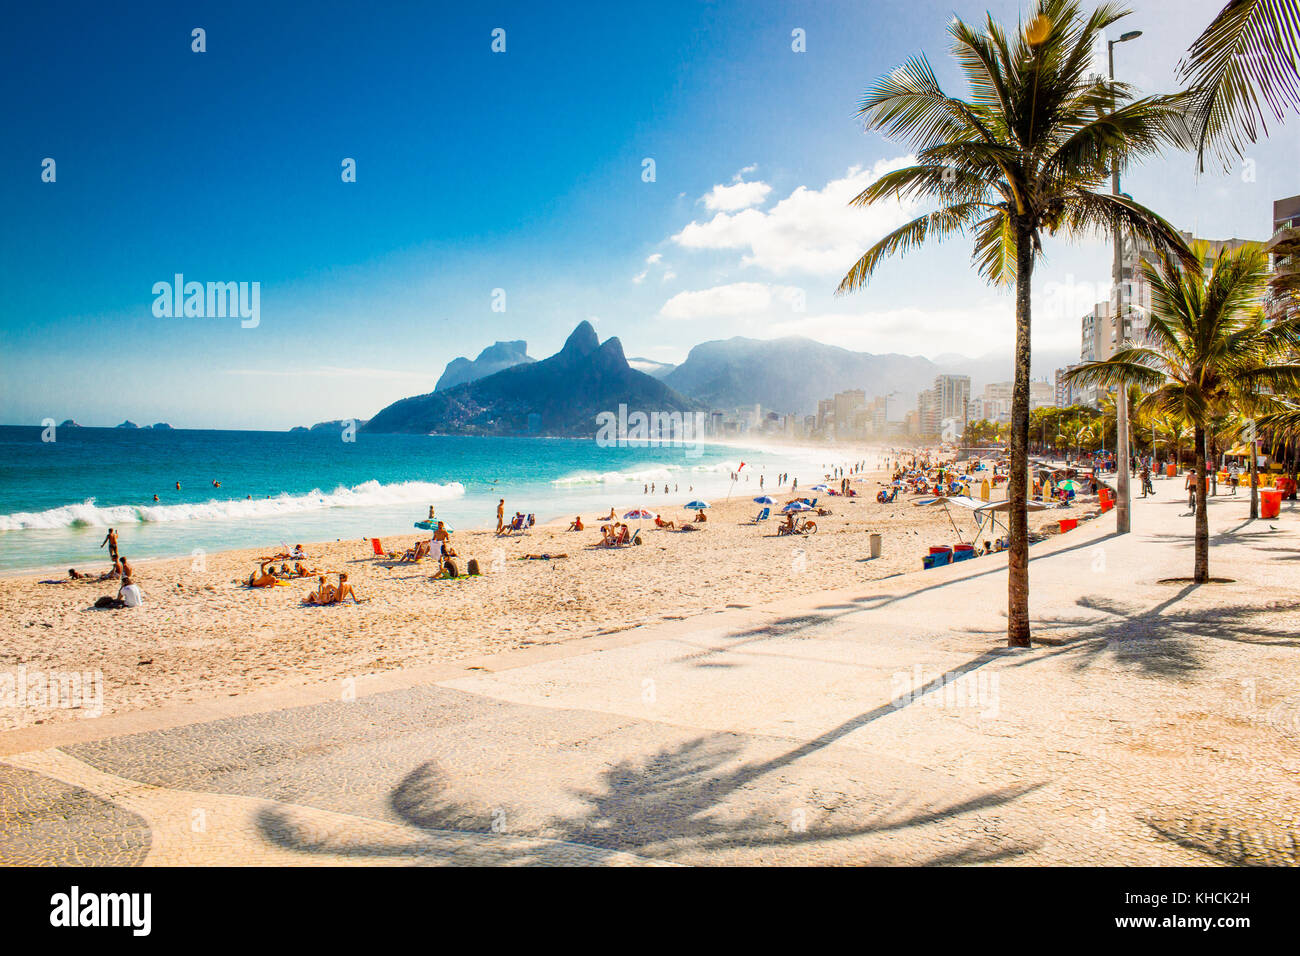 Palms and Two Brothers Mountain on Ipanema beach in Rio de Janeiro. Brazil. Stock Photo